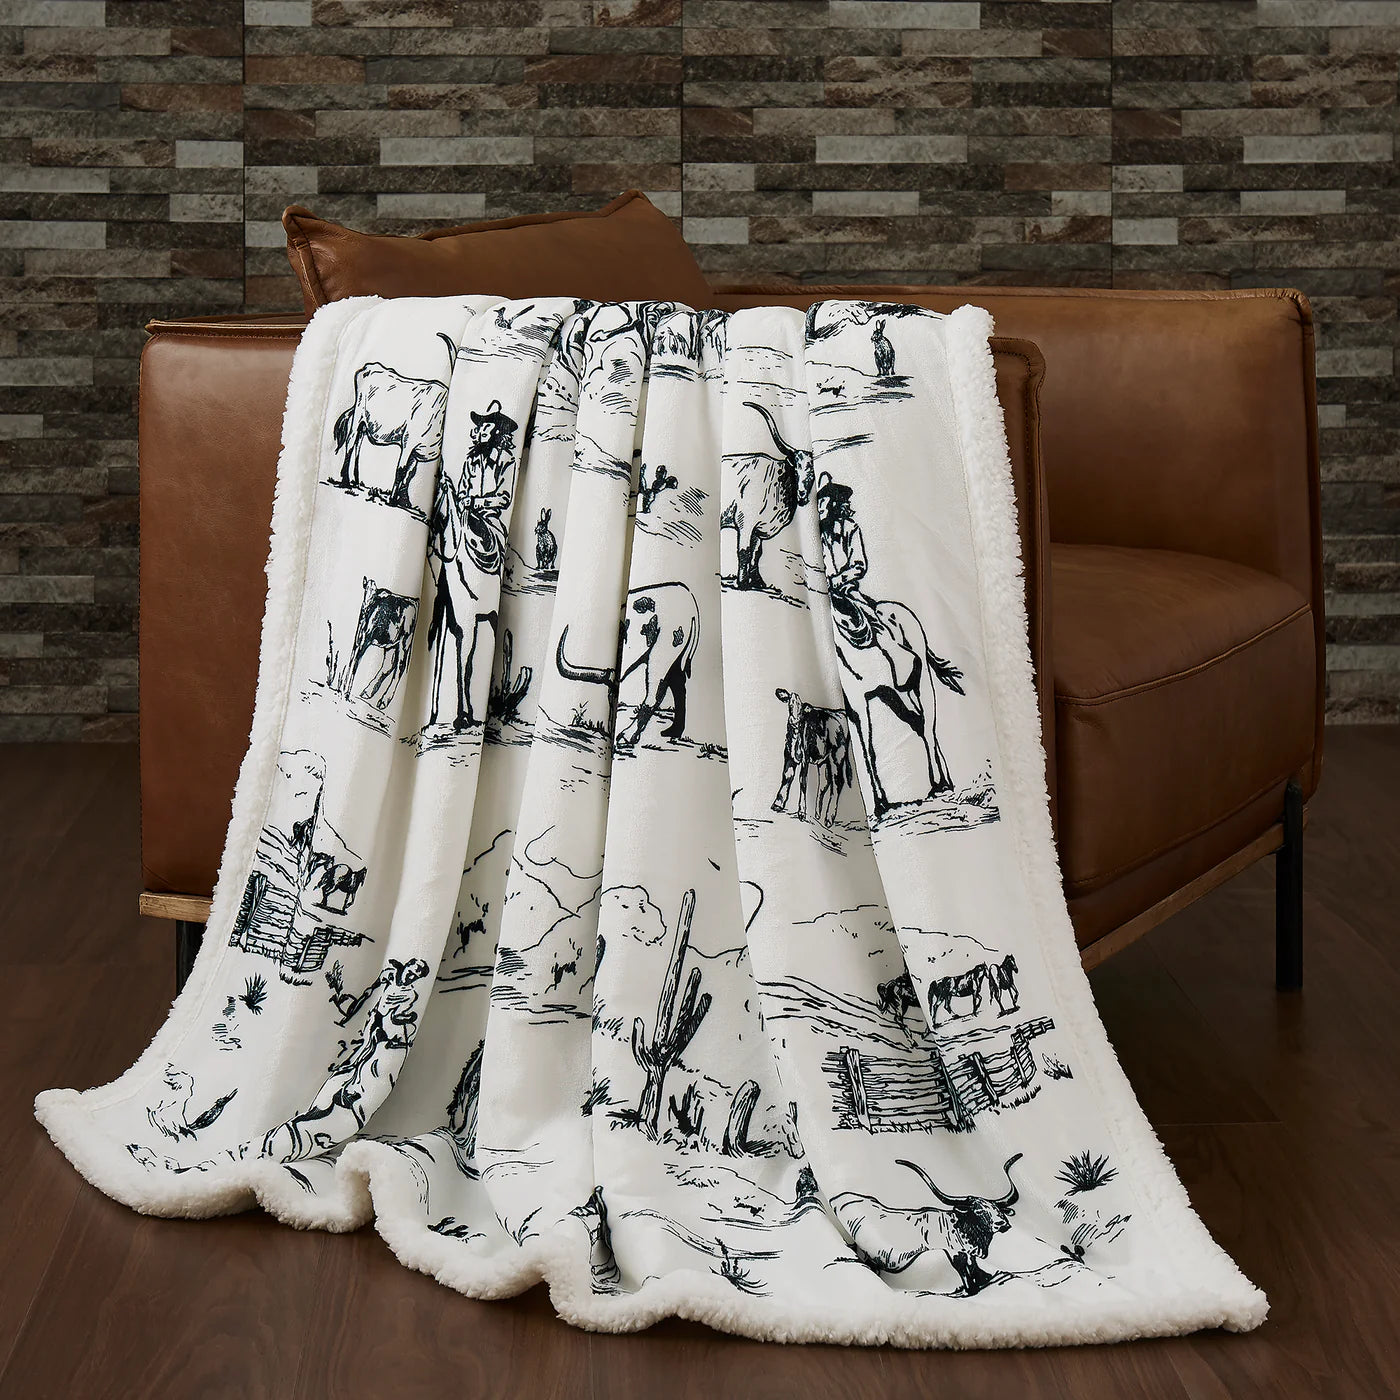 The Ranch Life Throw Blanket